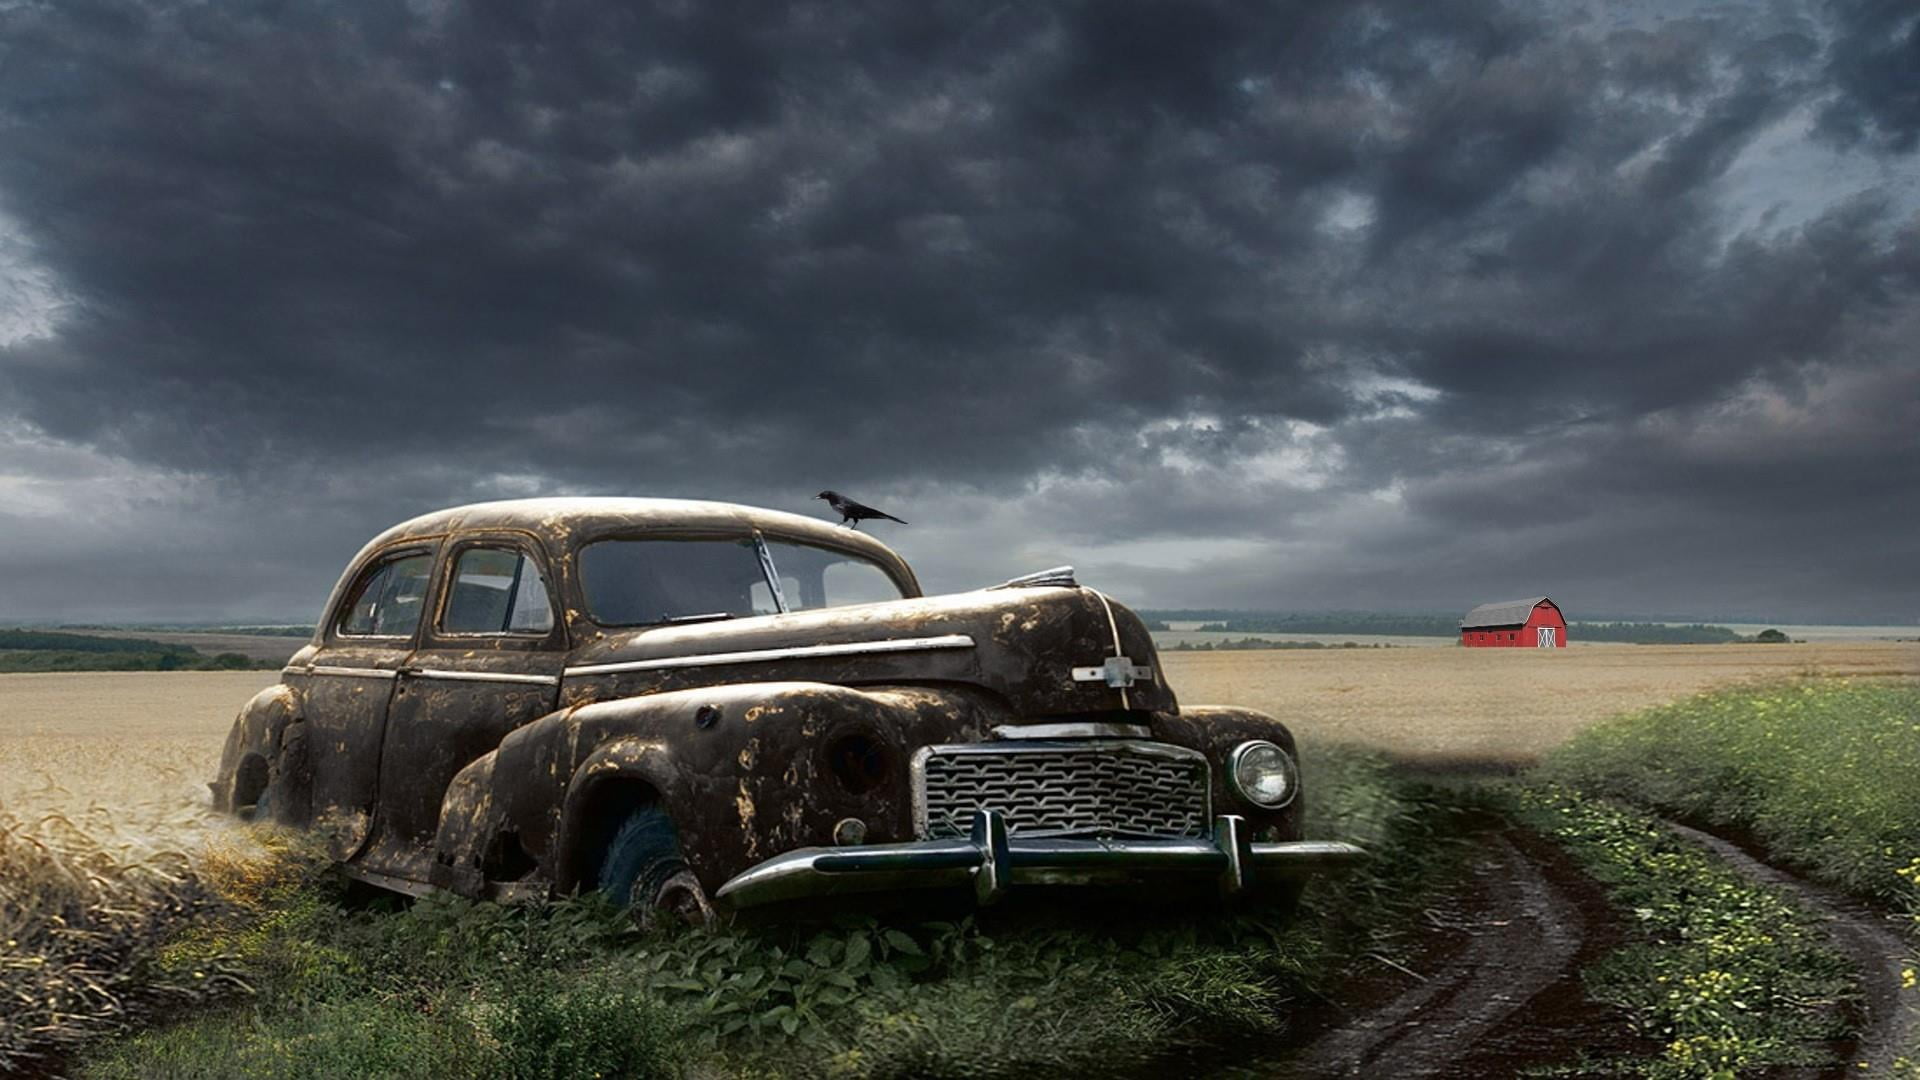 clouds, field, old car, vintage, farm, classic car, mode of transportation